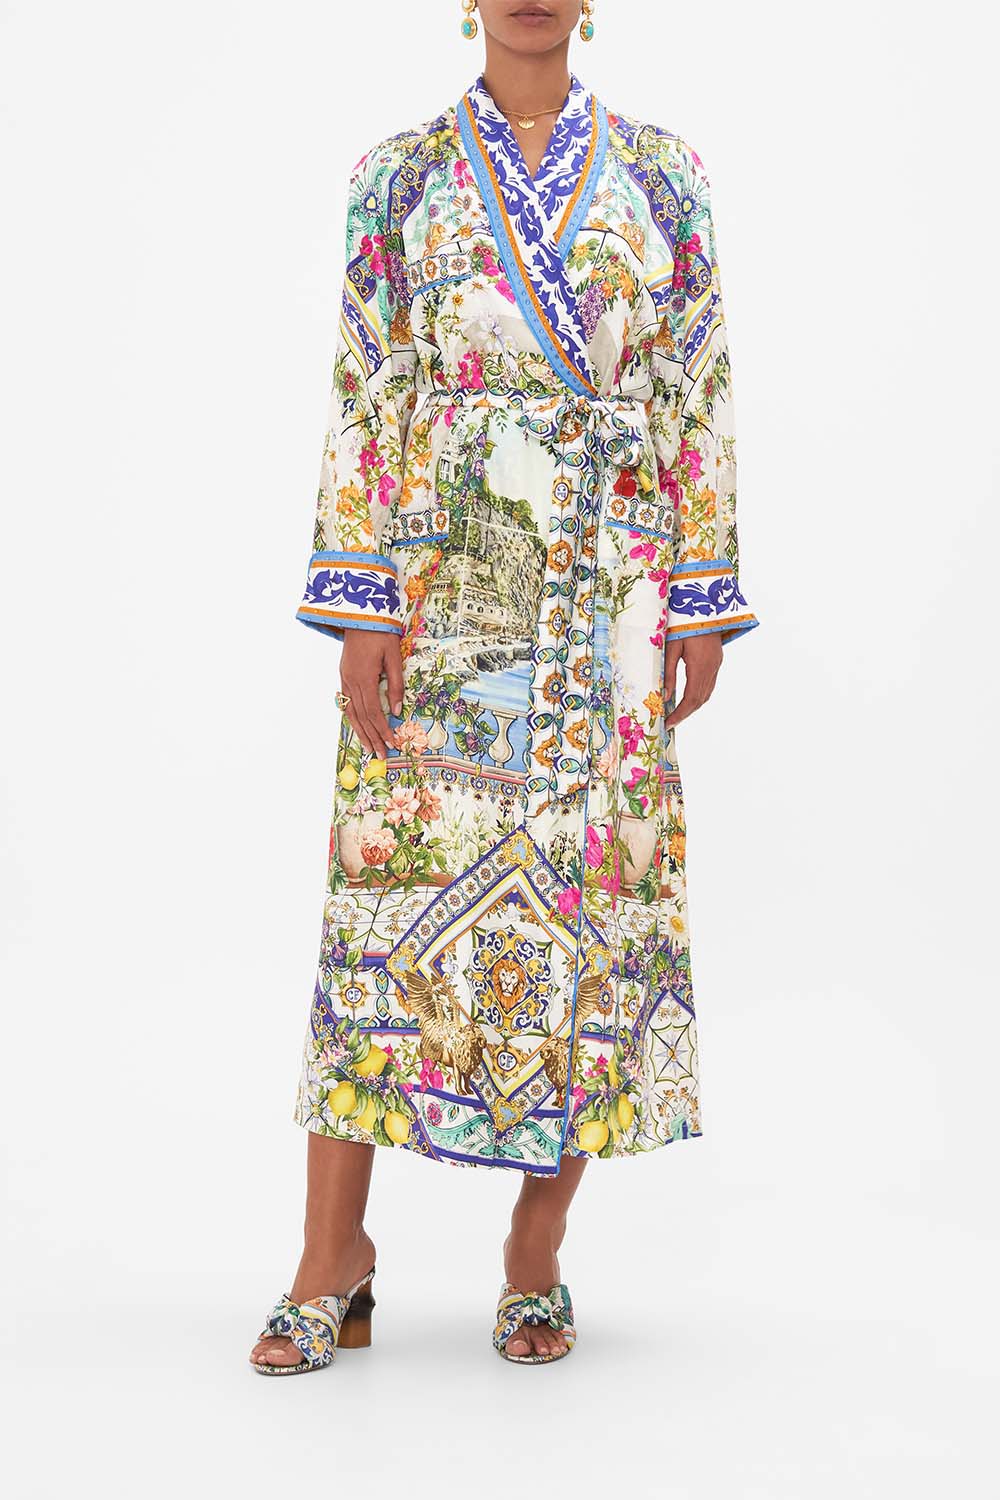 Front view of model wearing CAMILLA long silk robe in Amalfi Amore print